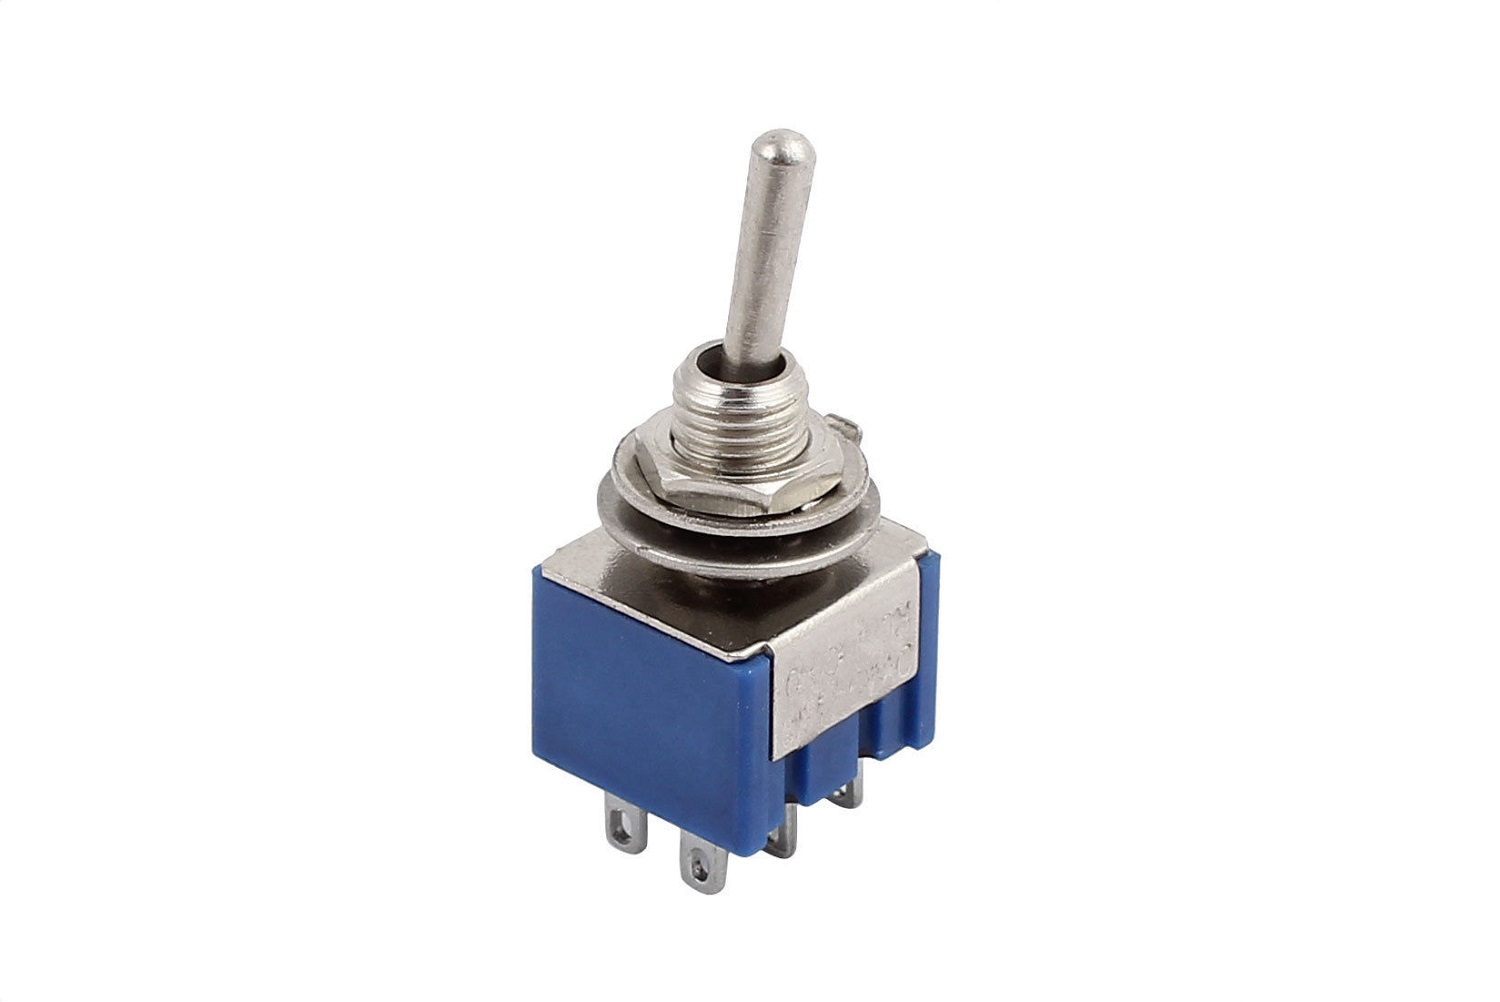 125 VAC. Details about   ON/ON SPDT Mini Toggle Switch 6 amp